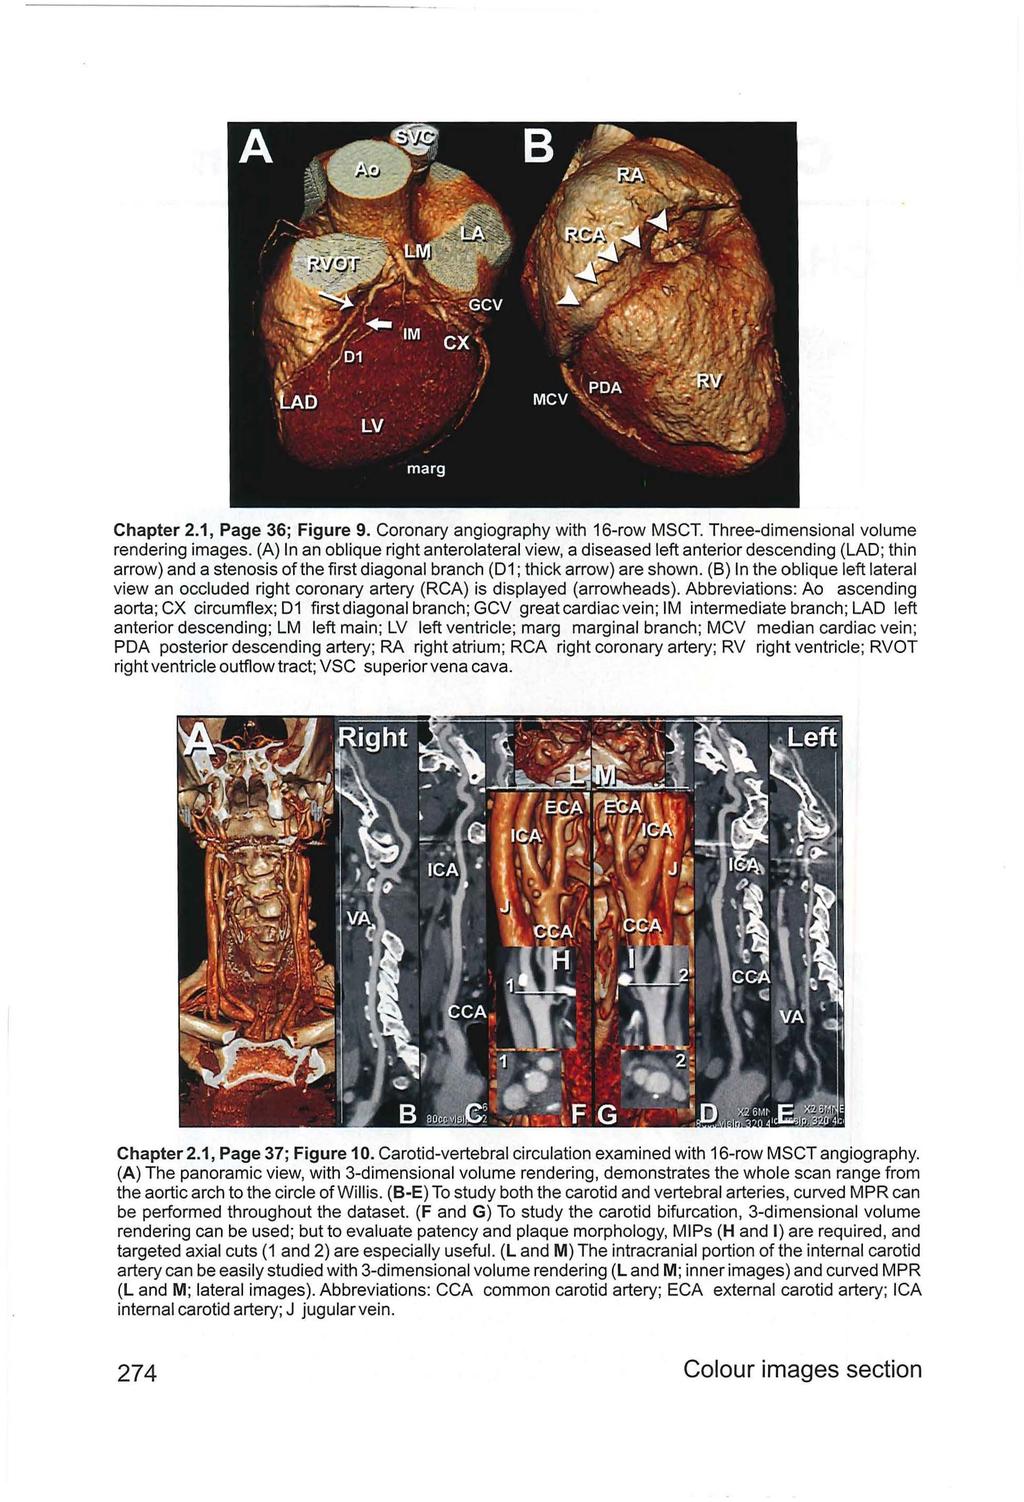 Chapter 2.1, Page 36; Figure 9. Coronary angiography with 16-row MSCT. Three-dimensional volume rendering images.